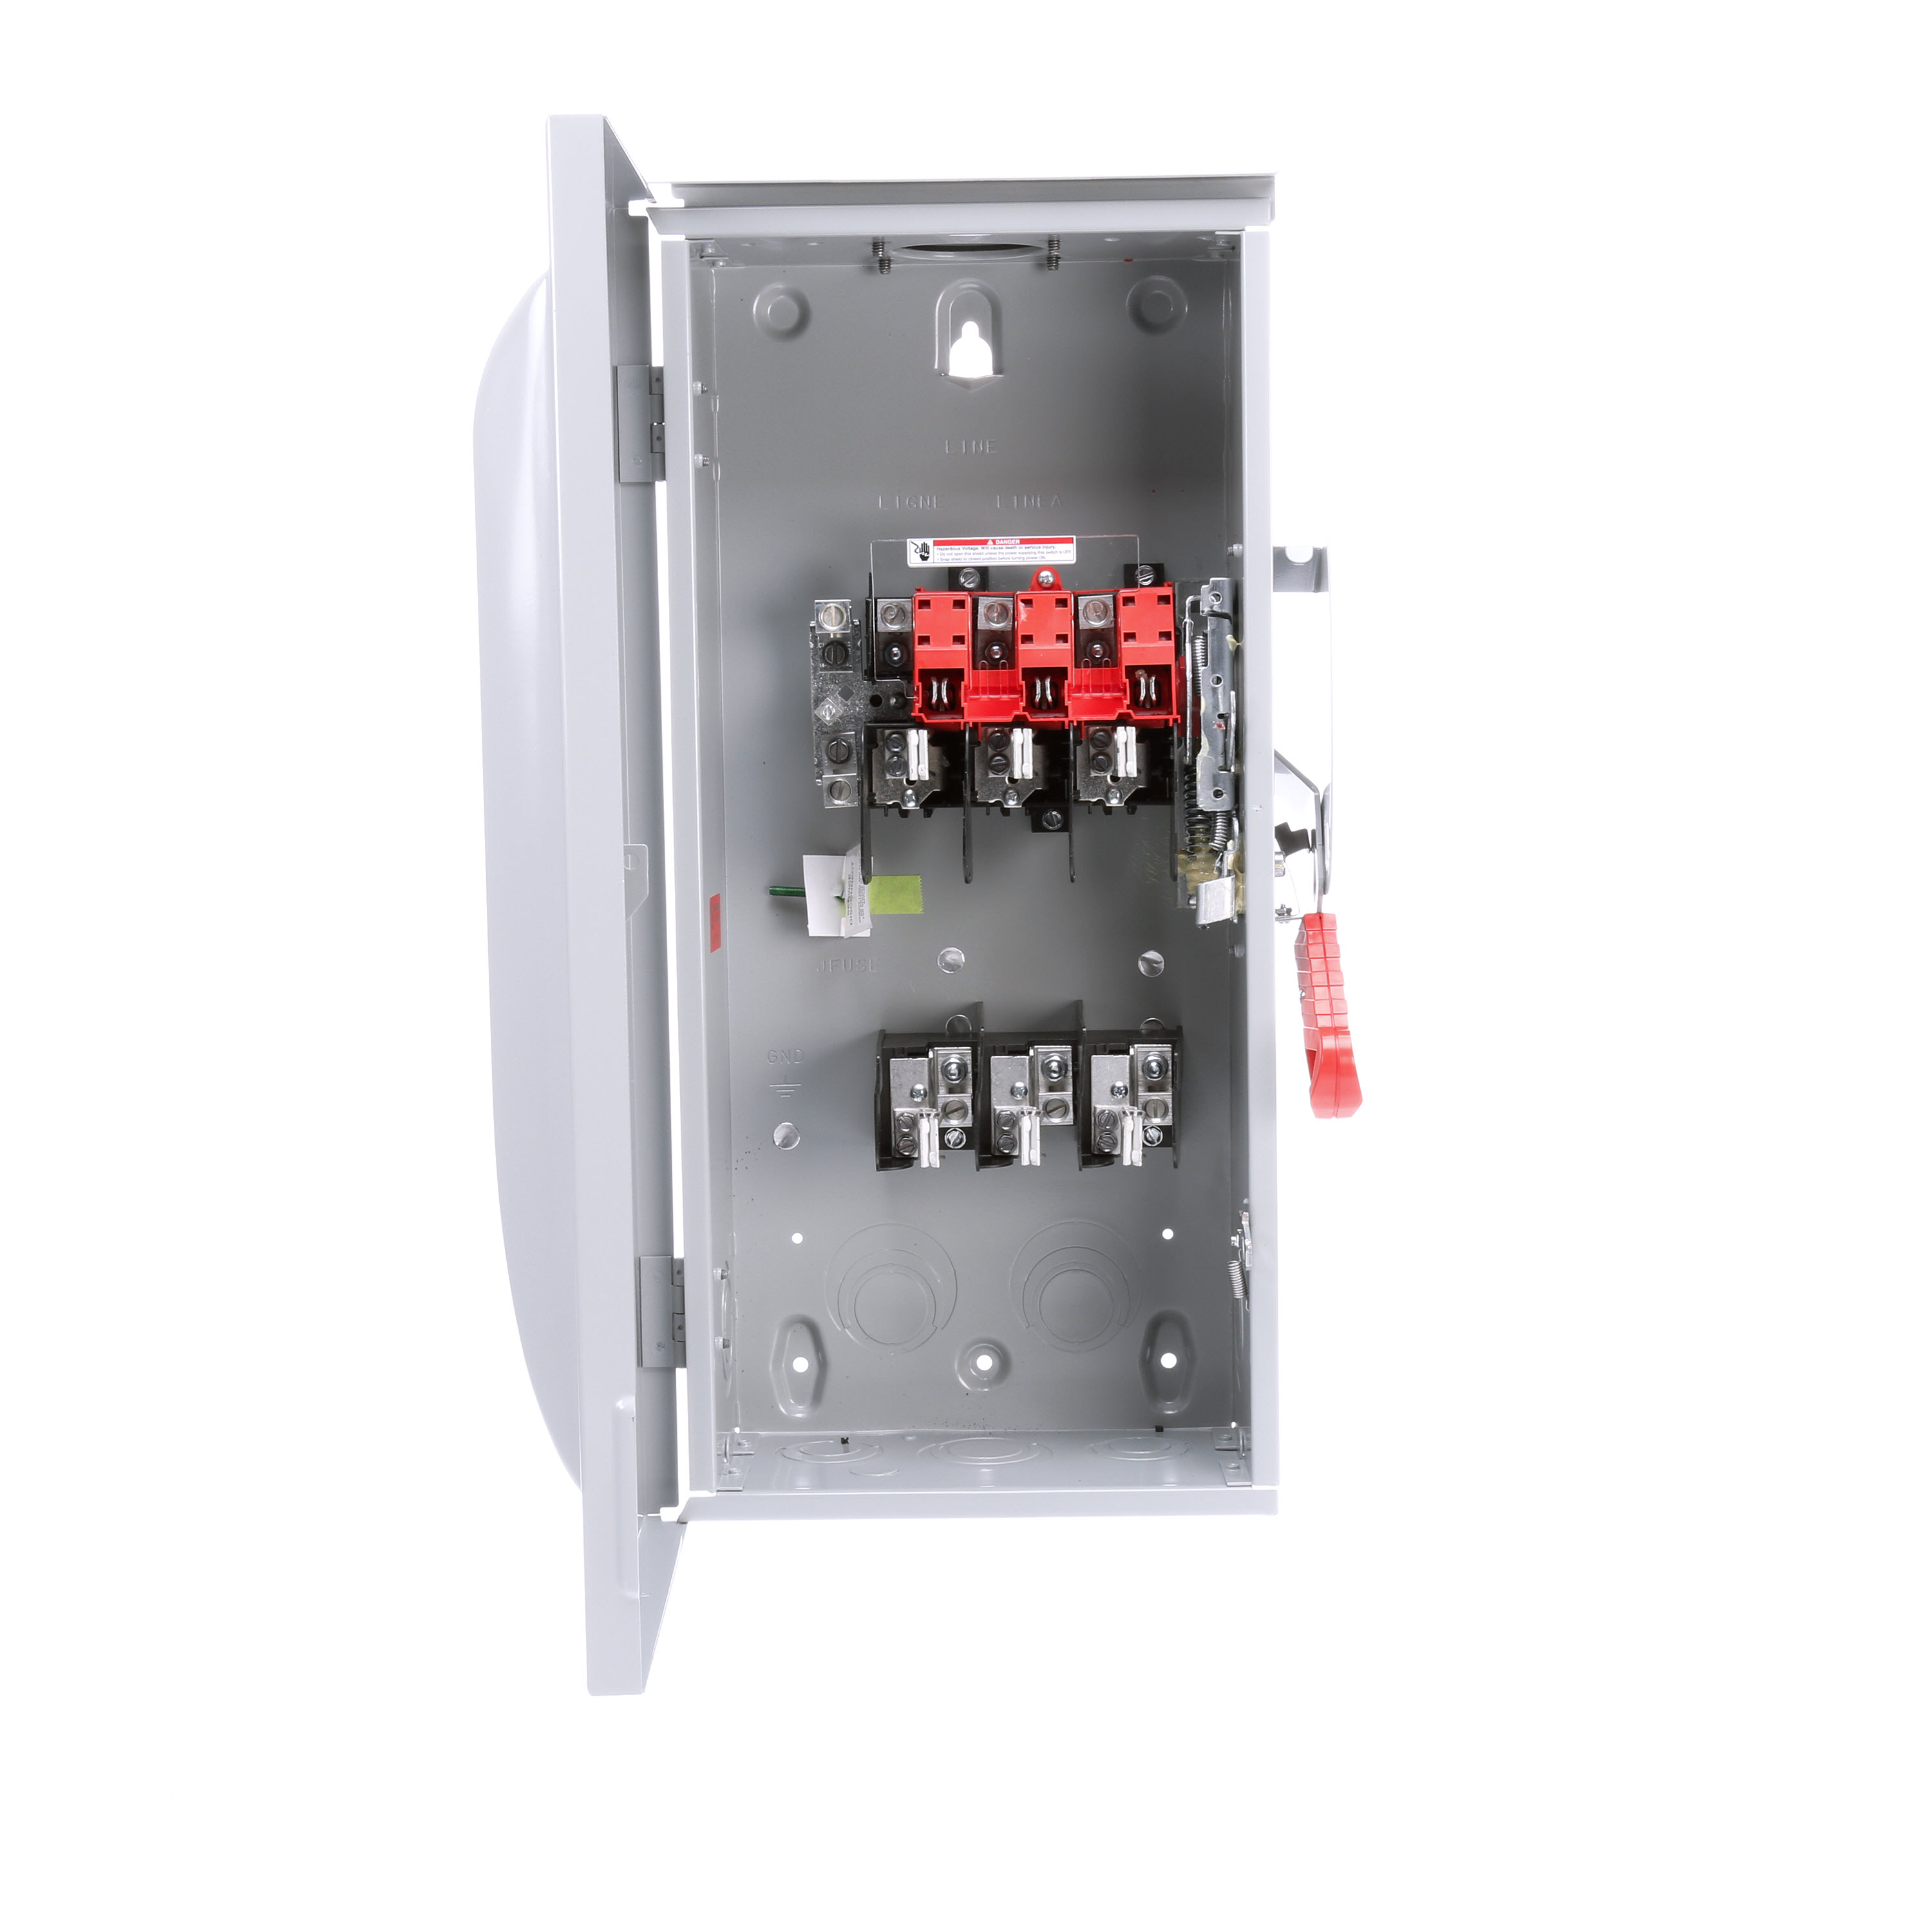 Siemens Low Voltage Circuit Protection Heavy Duty Safety Switch. 3-Pole 3-Fuse and solid neutral Fused in a type 3R enclosure (outdoor). Rated 600VAC (100A).